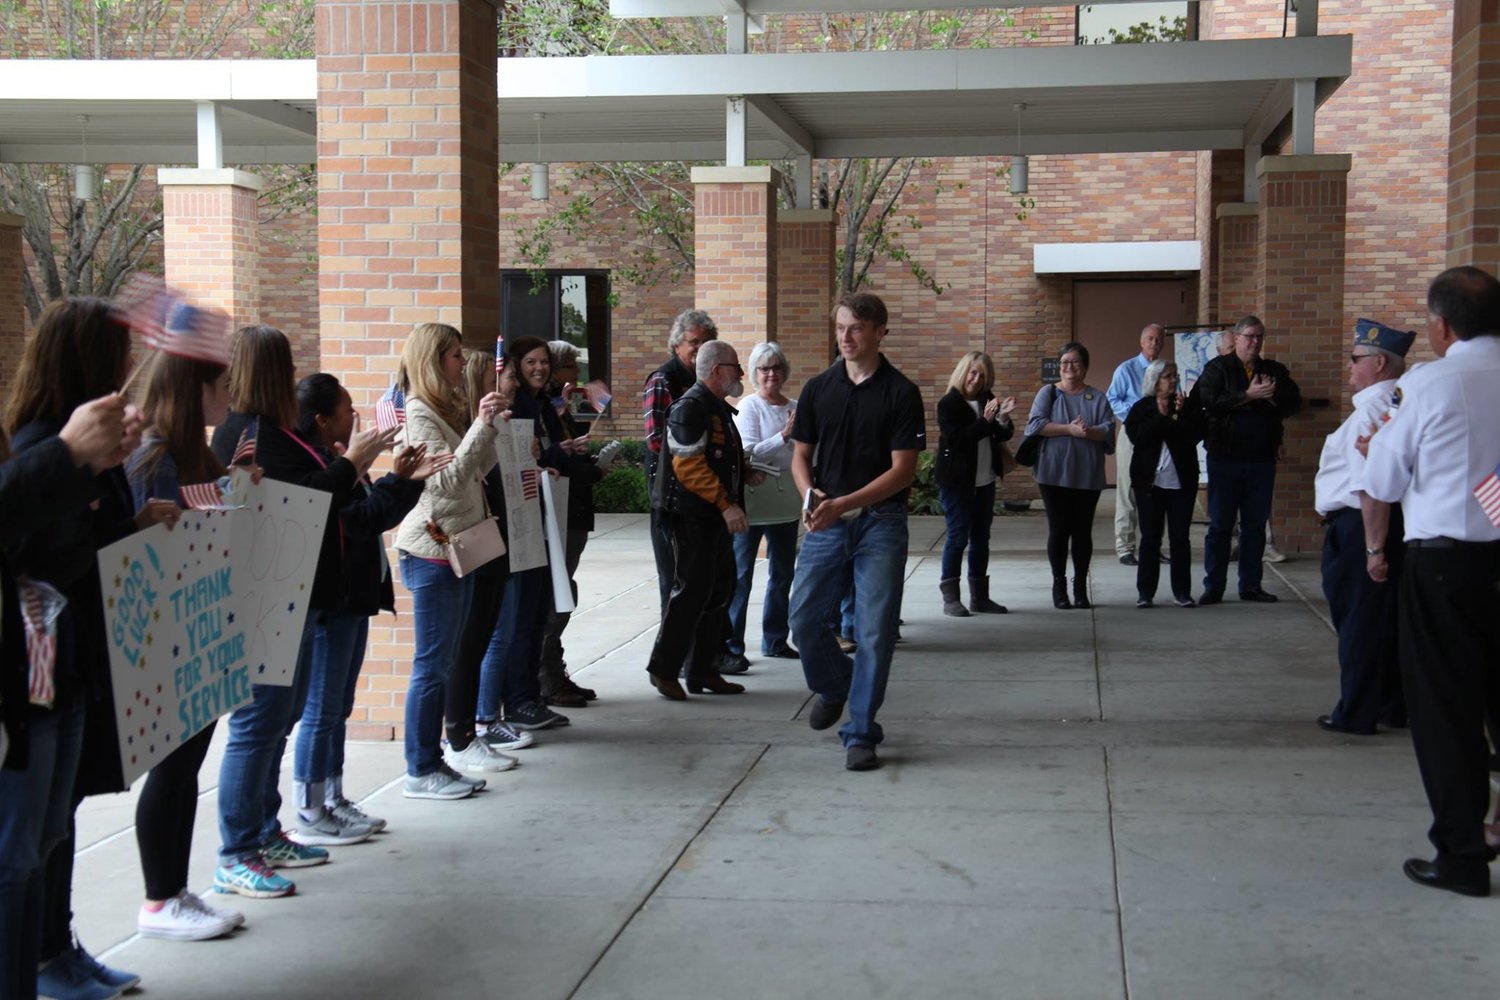 At the end of each TEAM event, participants form two lines for recruits to walk through for a pep-rally style sendoff.